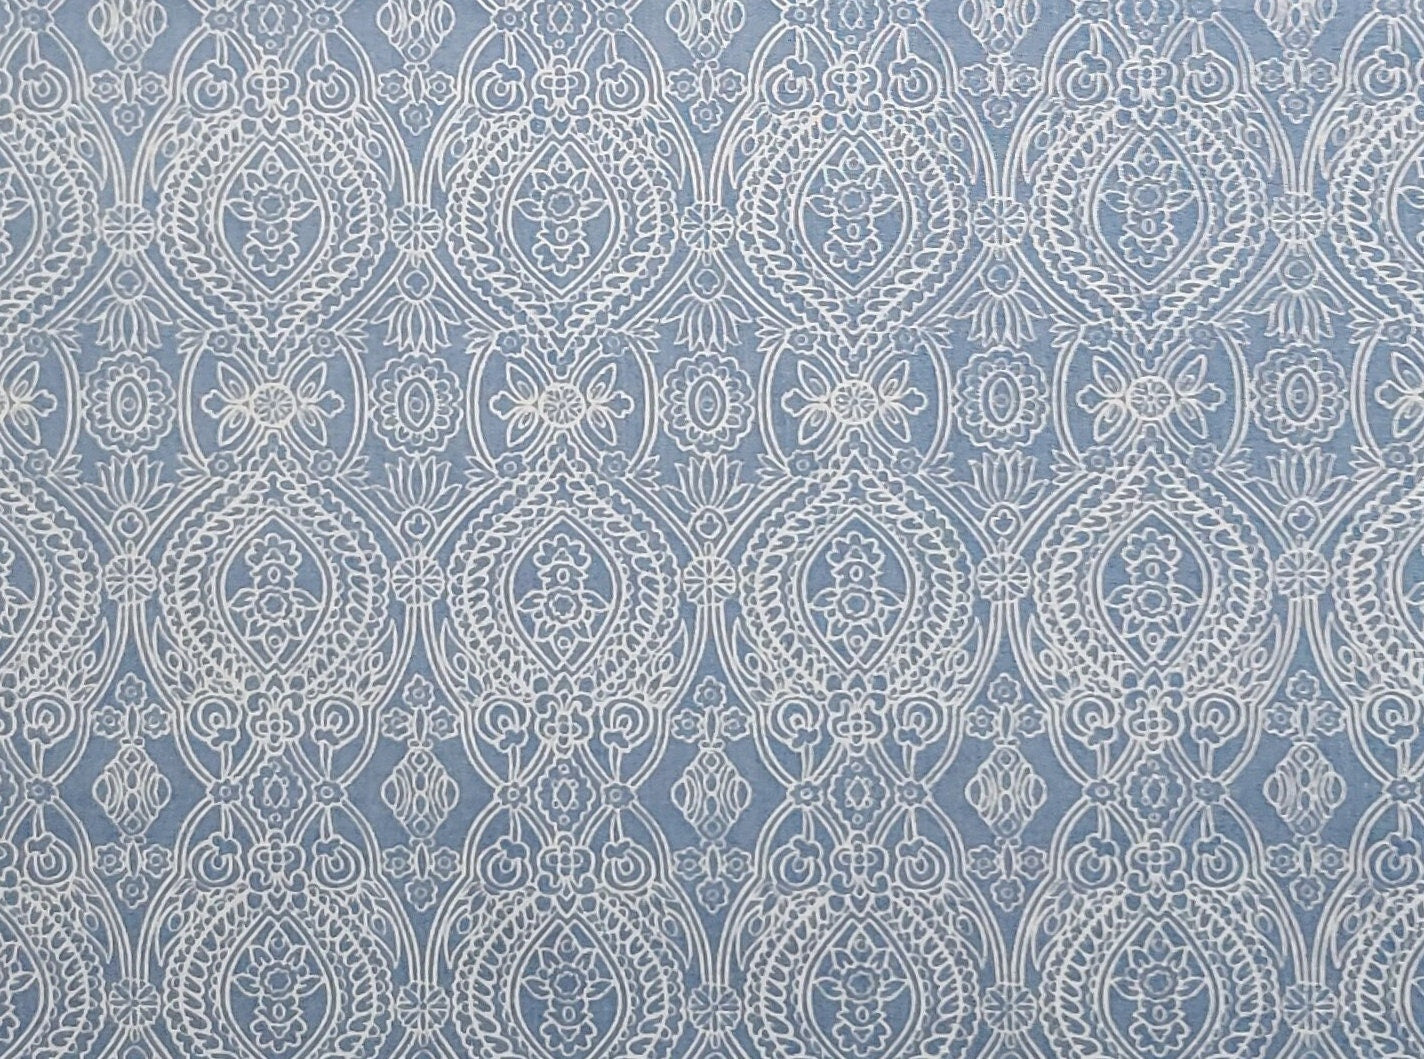 Vintage Lightweight Double-Sided (Same Pattern on Both Sides) Light Blue Fabric / White Medallion Print - Selvage to Selvage Print